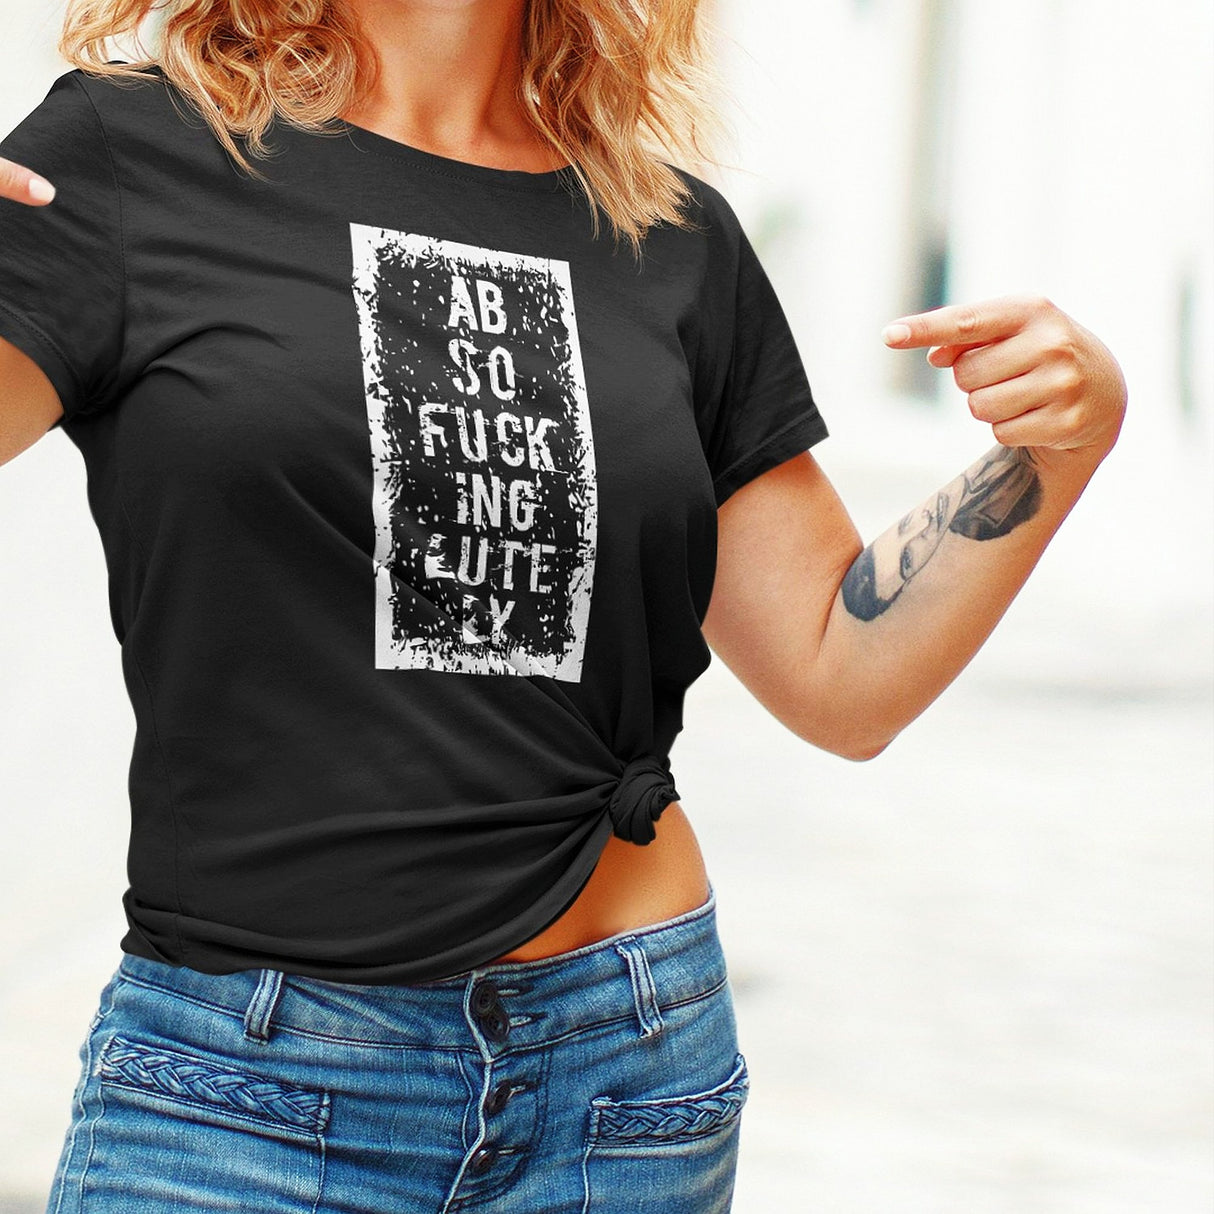 absofuckinglutely-funny-tee-life-t-shirt-funny-tee-humor-t-shirt-quirky-tee#color_black